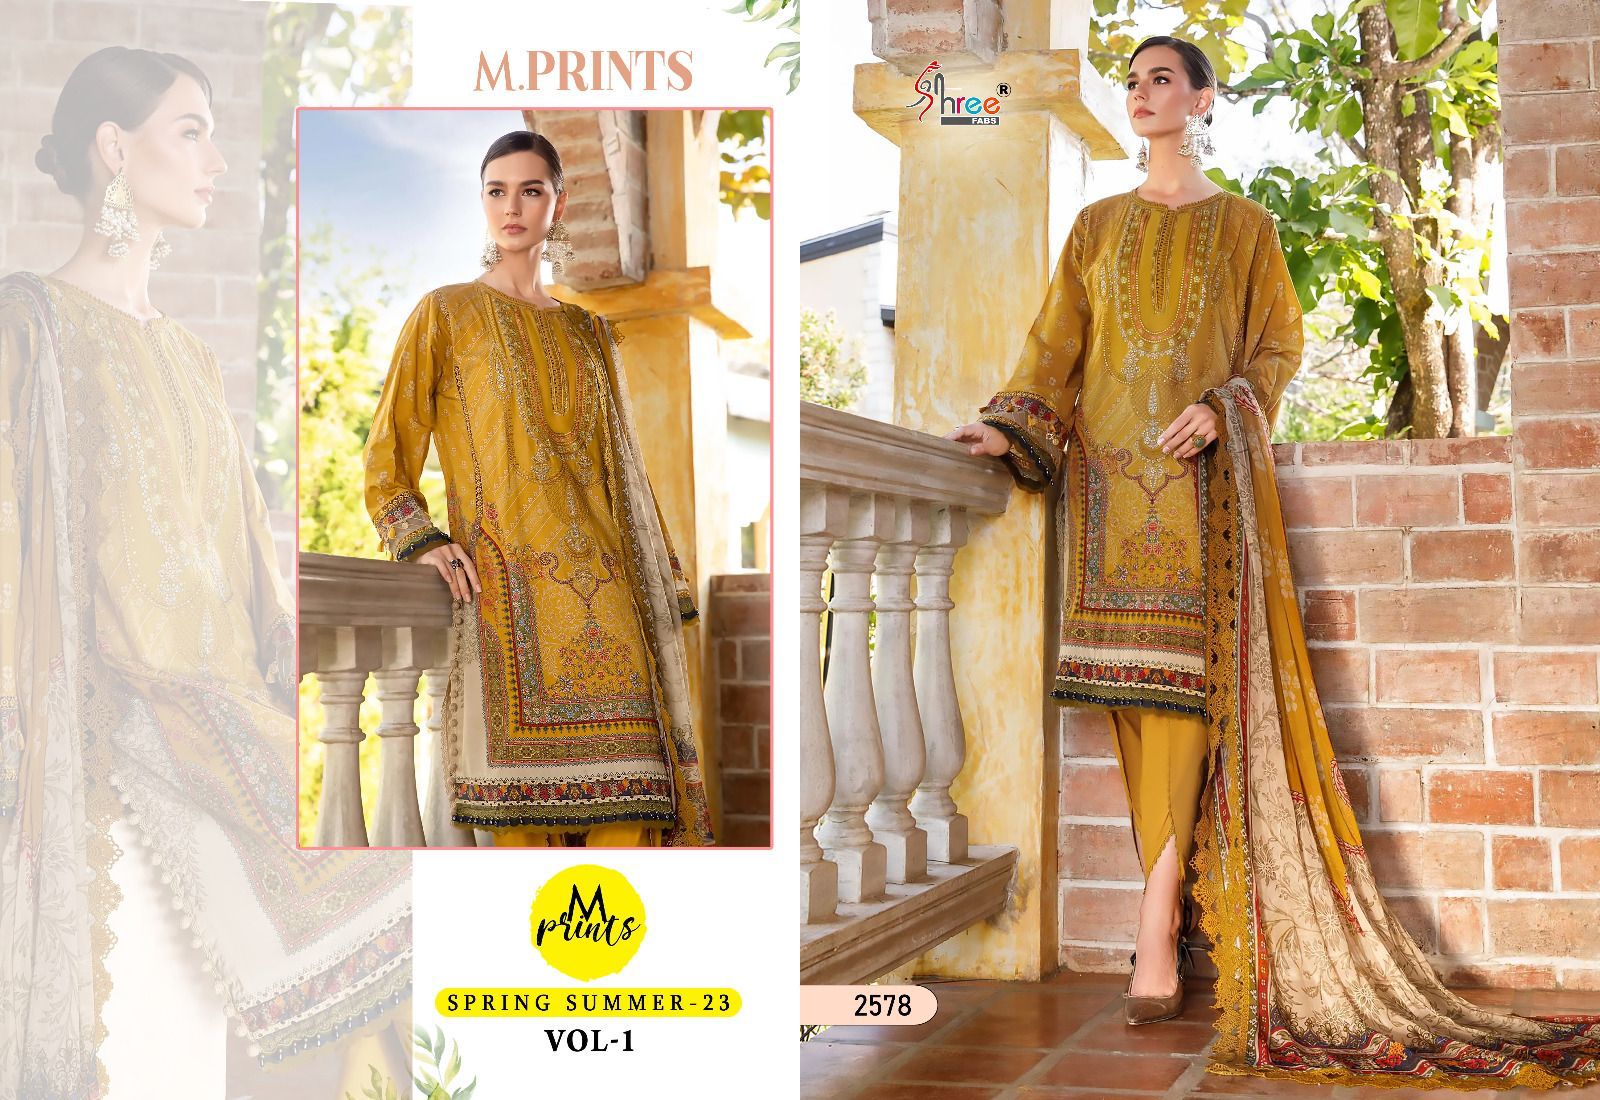 Shree M Prints Spring Summer 23 Vol 1 collection 3